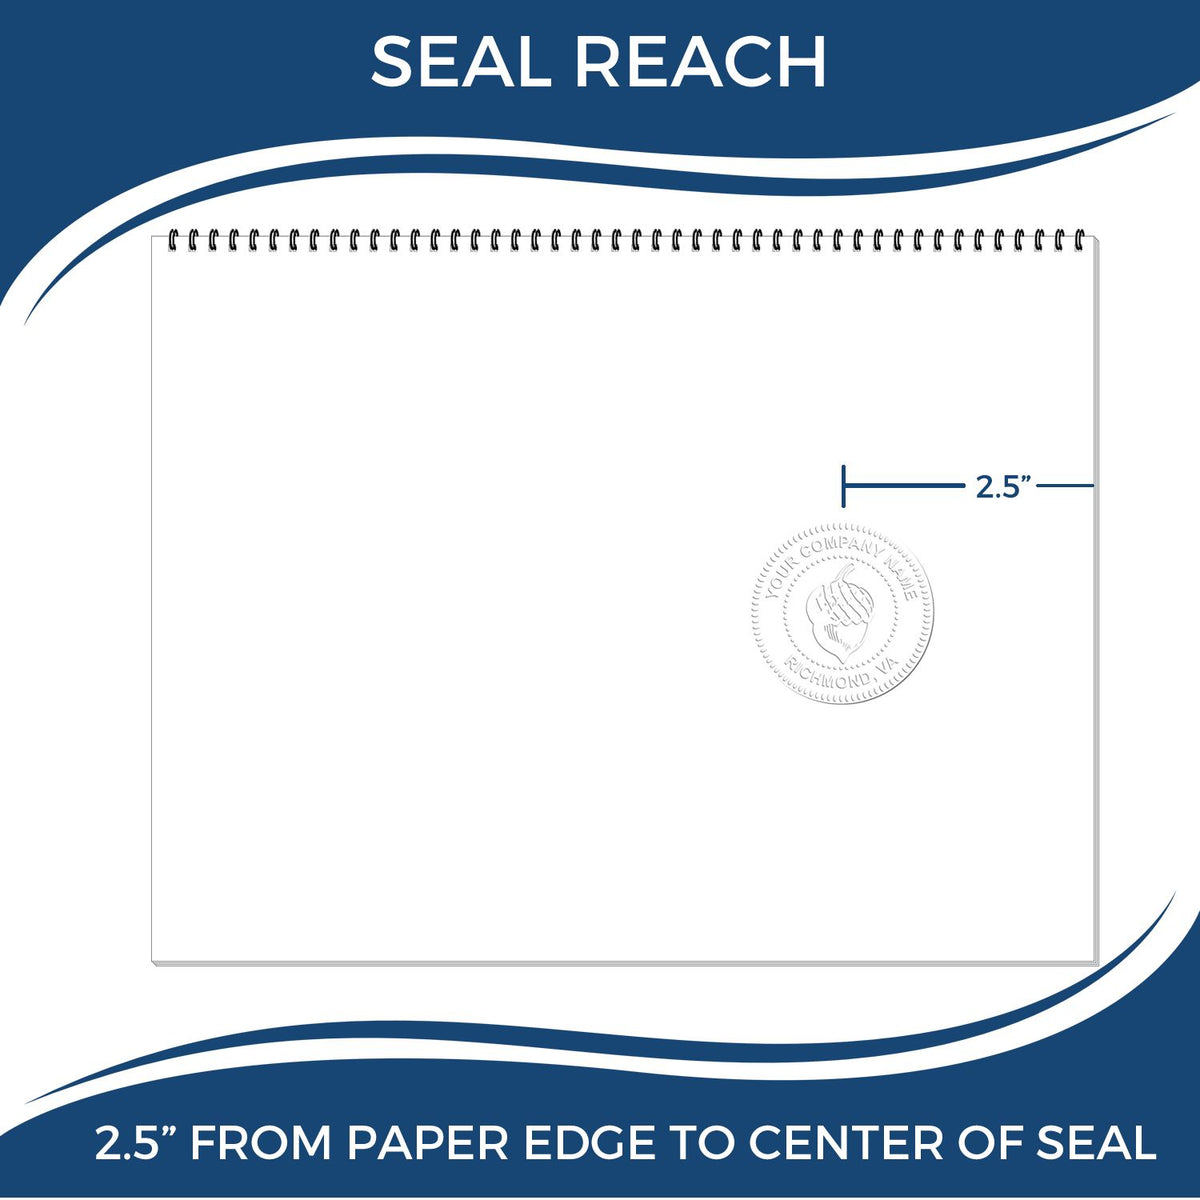 An infographic showing the seal reach which is represented by a ruler and a miniature seal image of the Heavy Duty Cast Iron Alabama Architect Embosser